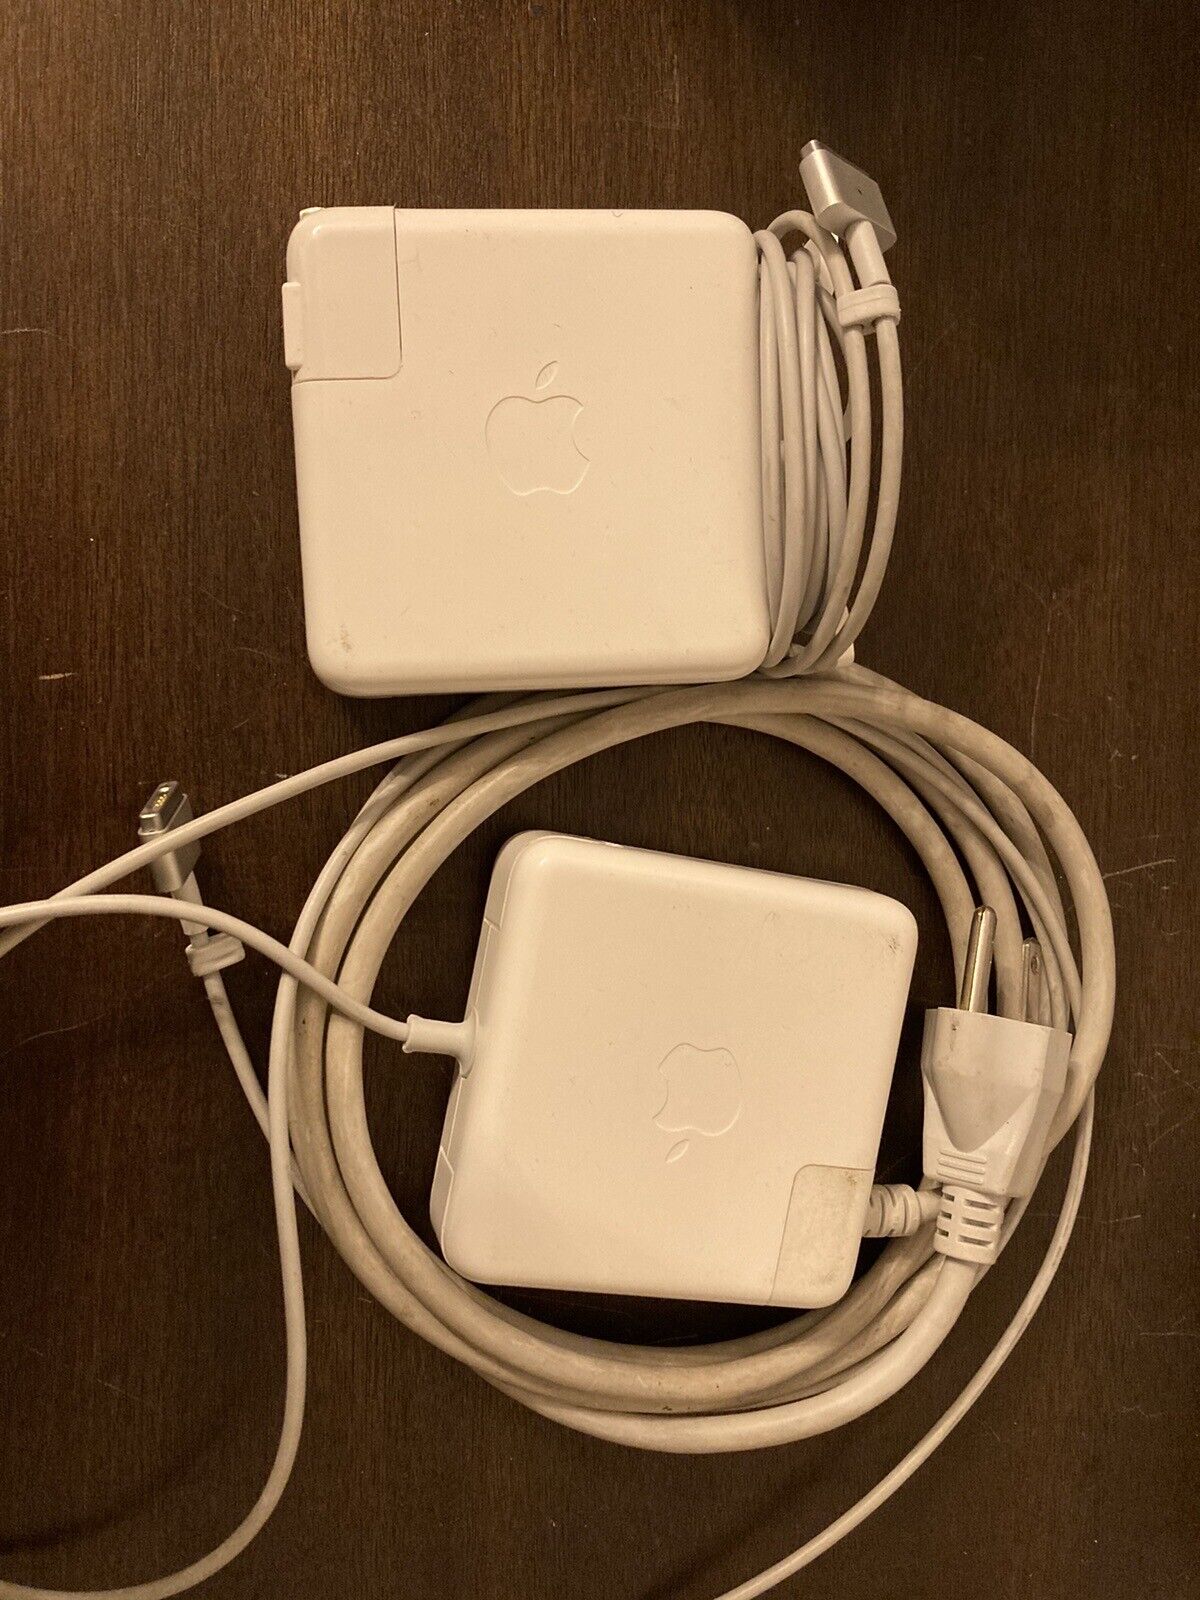 Two Genuine Apple 85W MagSafe 2 Charger Power Adapter MacBook Pro FOR PARTS ONLY